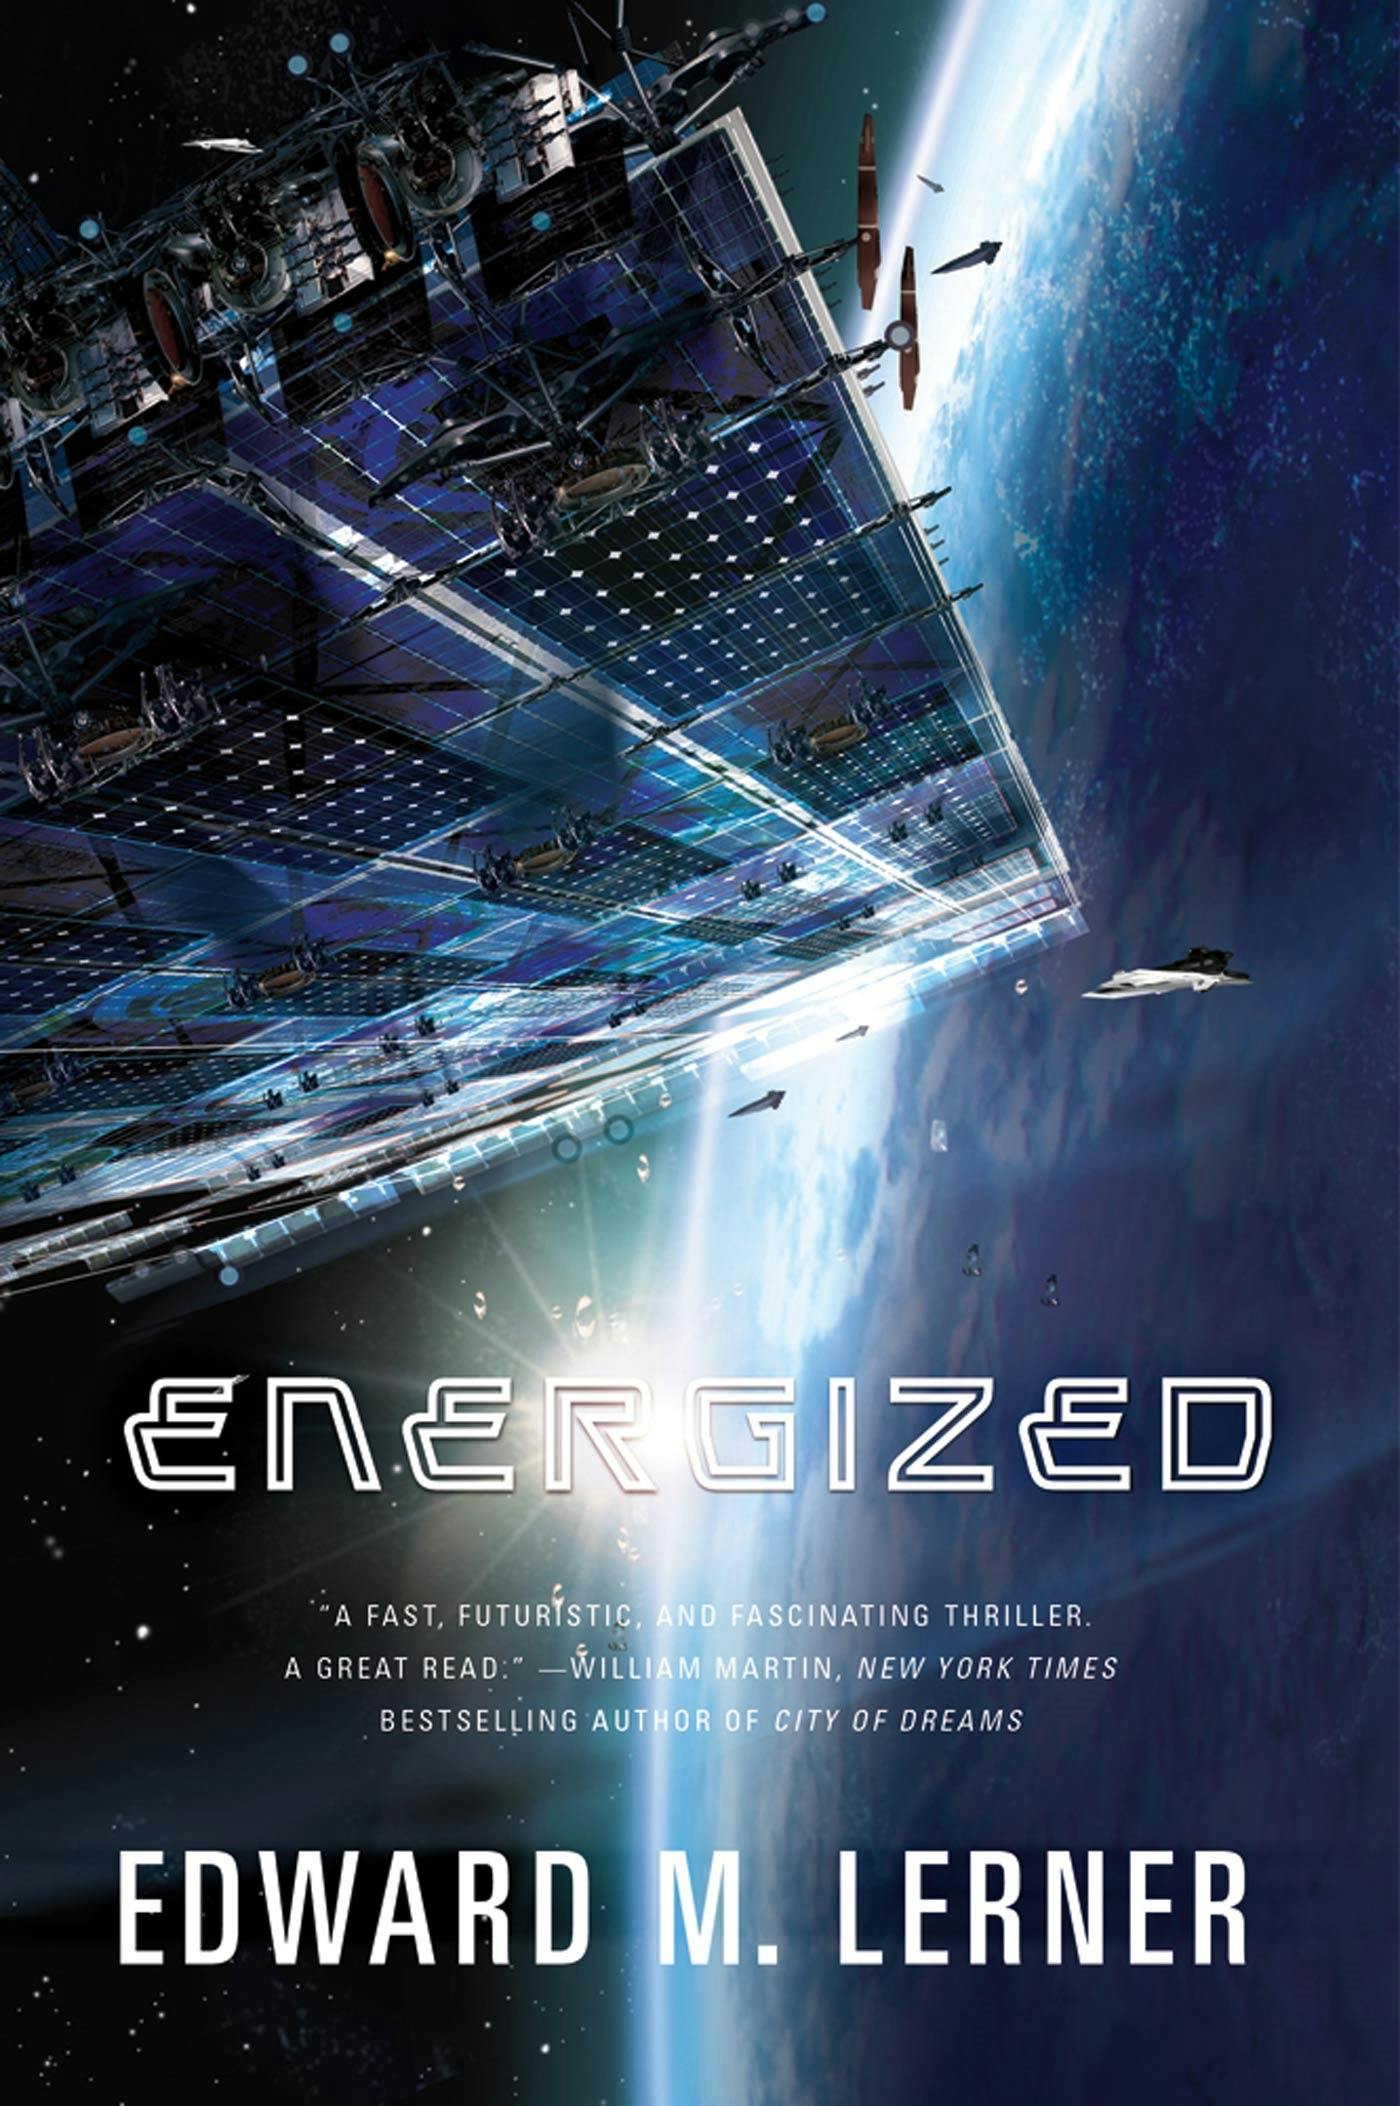 Cover for the book titled as: Energized